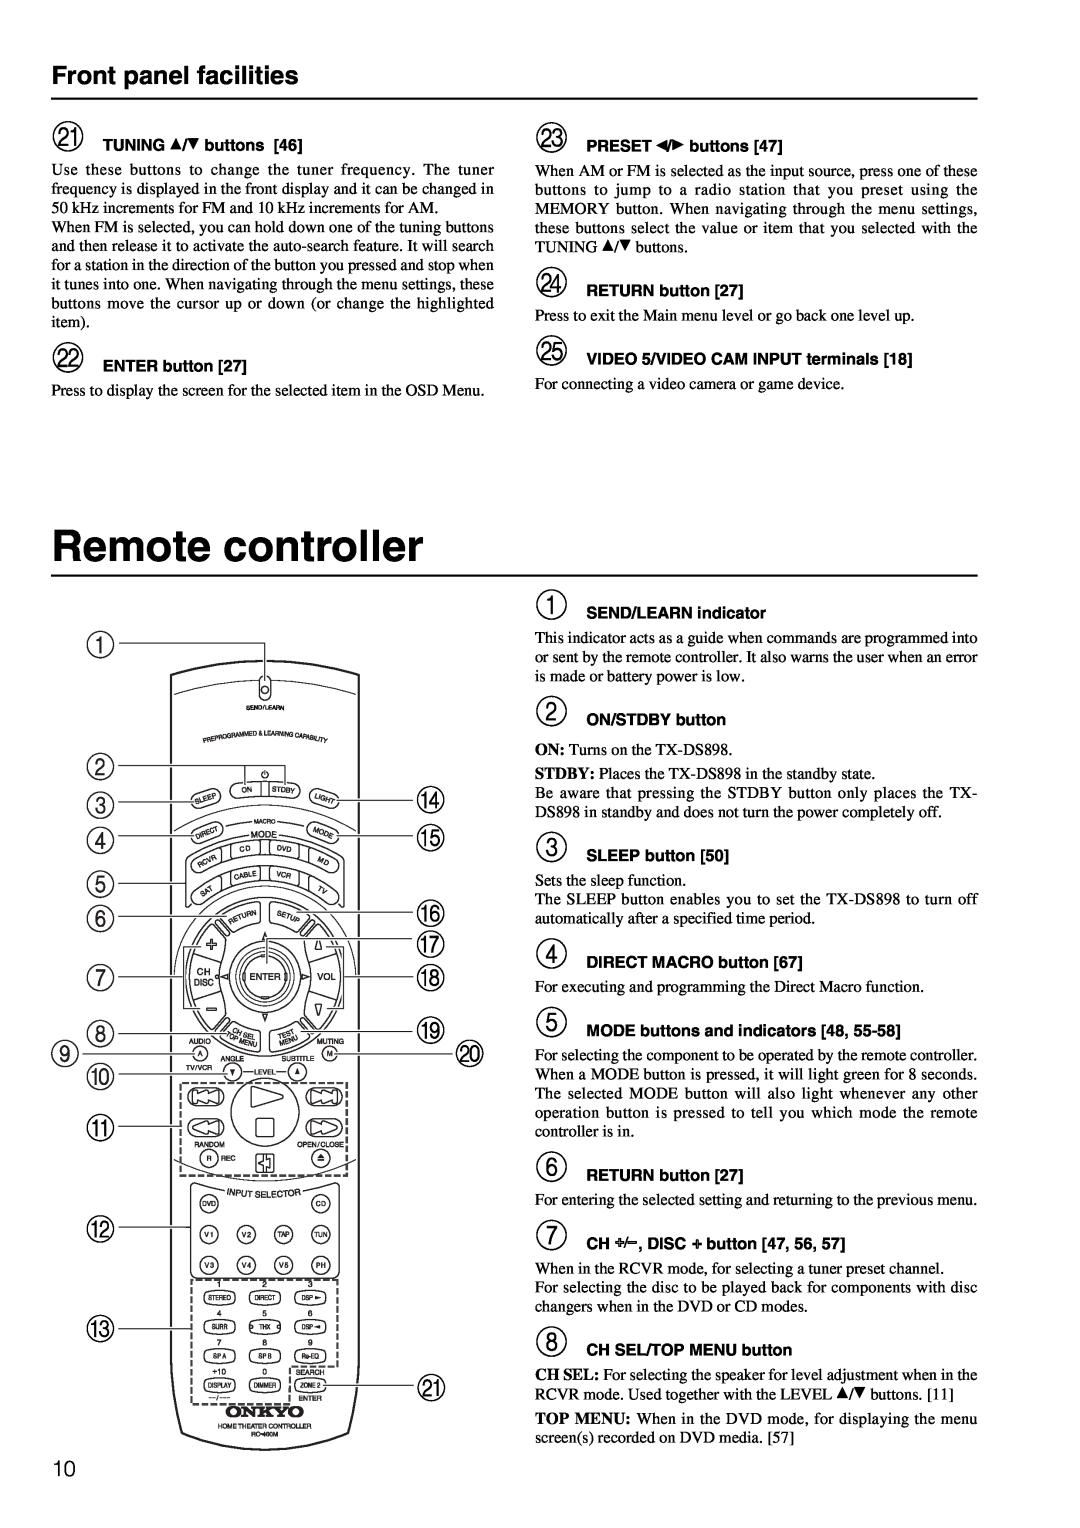 Onkyo TX-DS898 instruction manual Remote controller, Front panel facilities 